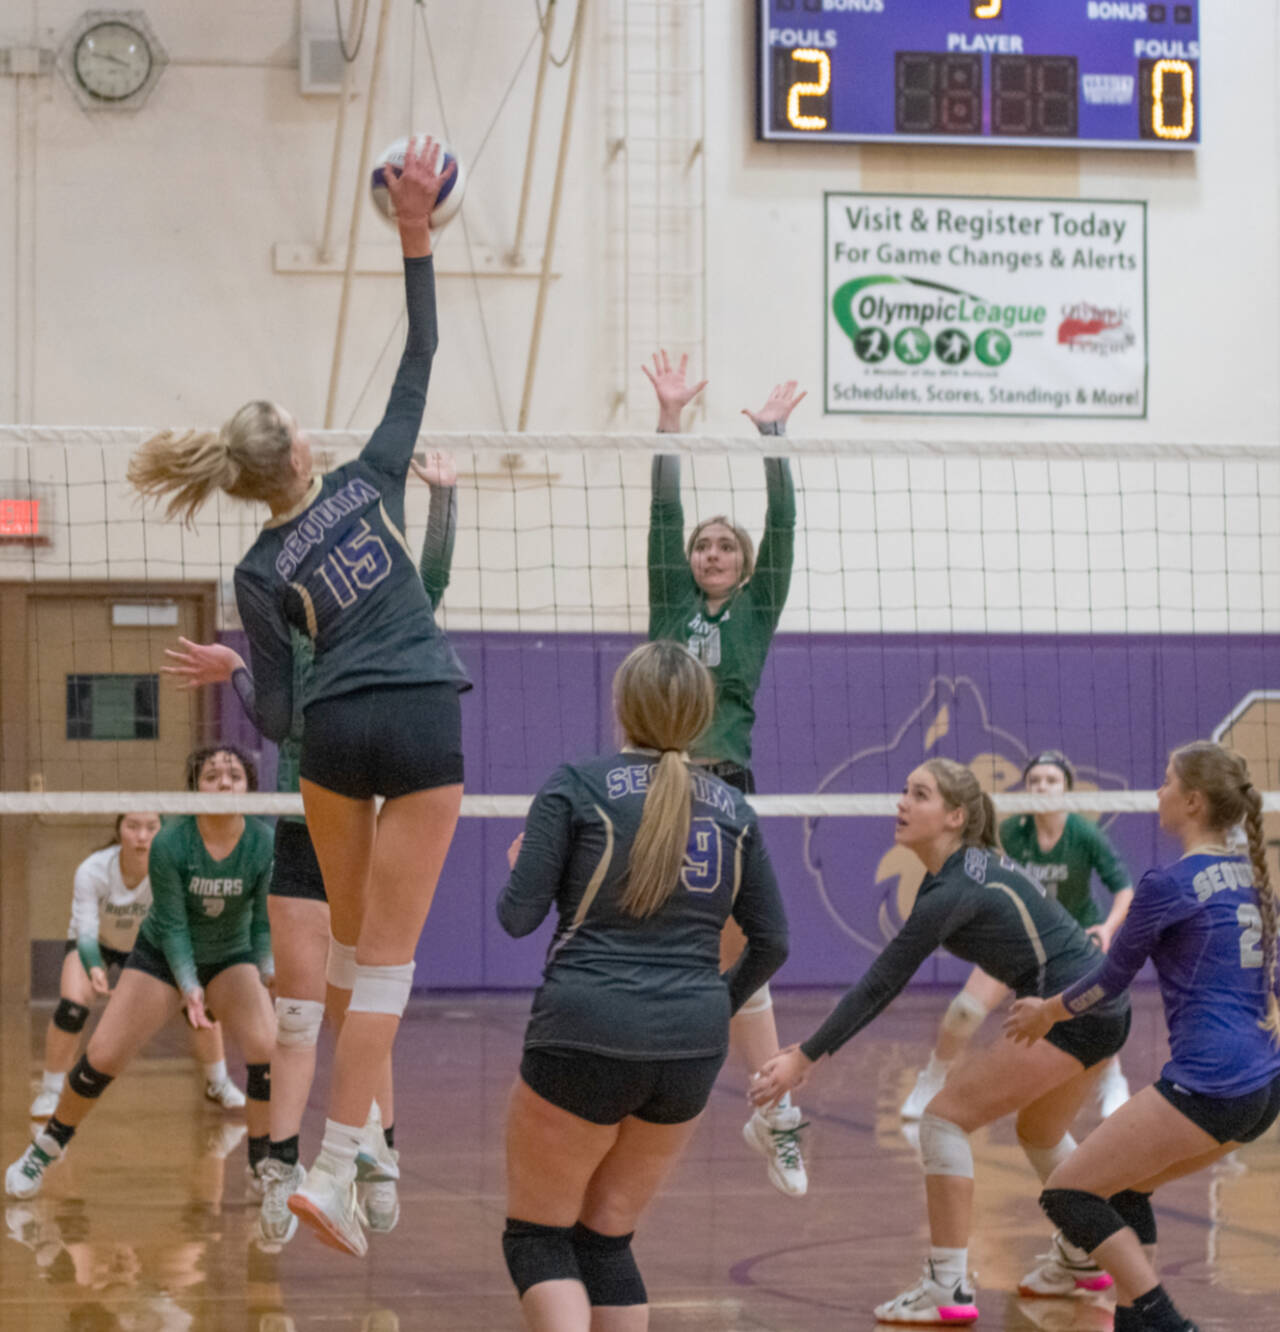 Sequim Gazette photo by Emily Matthiessen / Sequim’s Kendall Hastings (15) looks to hit past the block of Port Angeles’ Jasmine Messinger in an Olympic League tournament game on Nov. 3 in Sequim. The host Wolves topped PA’s Roughriders in three games.